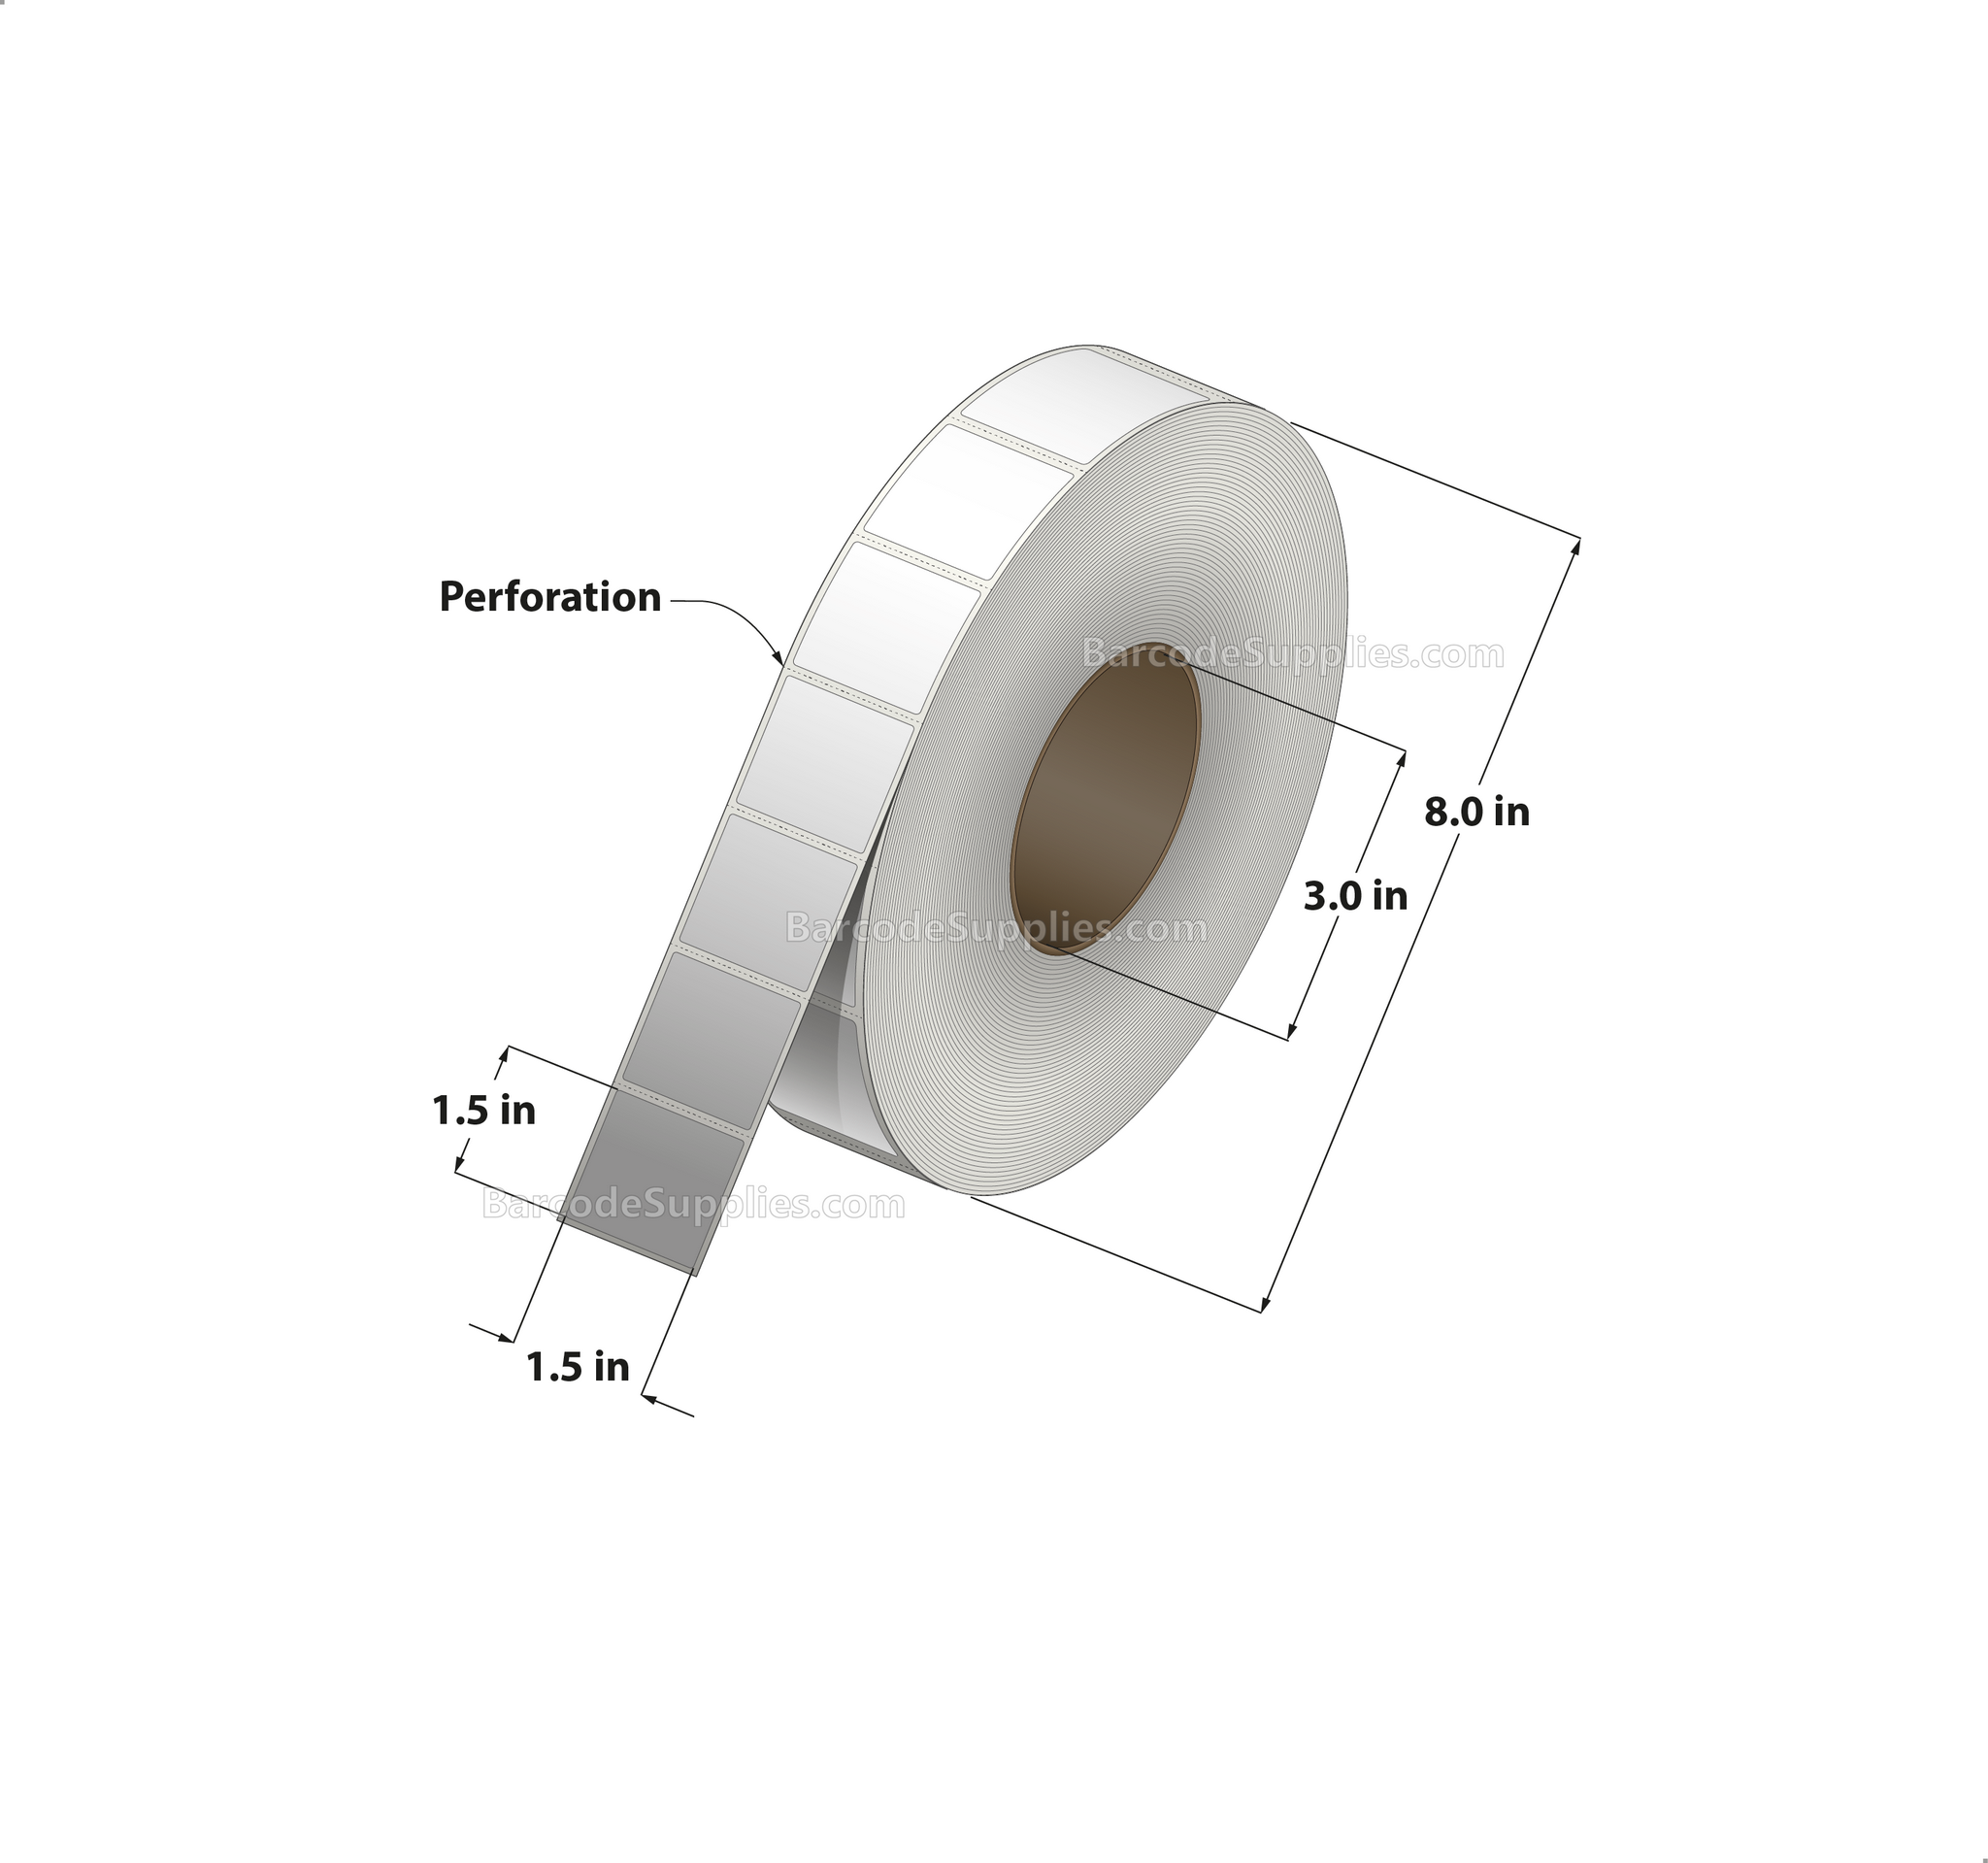 1.5 x 1.5 Thermal Transfer White Labels With Permanent Adhesive - Perforated - 3600 Labels Per Roll - Carton Of 8 Rolls - 28800 Labels Total - MPN: RT-15-15-3600-3